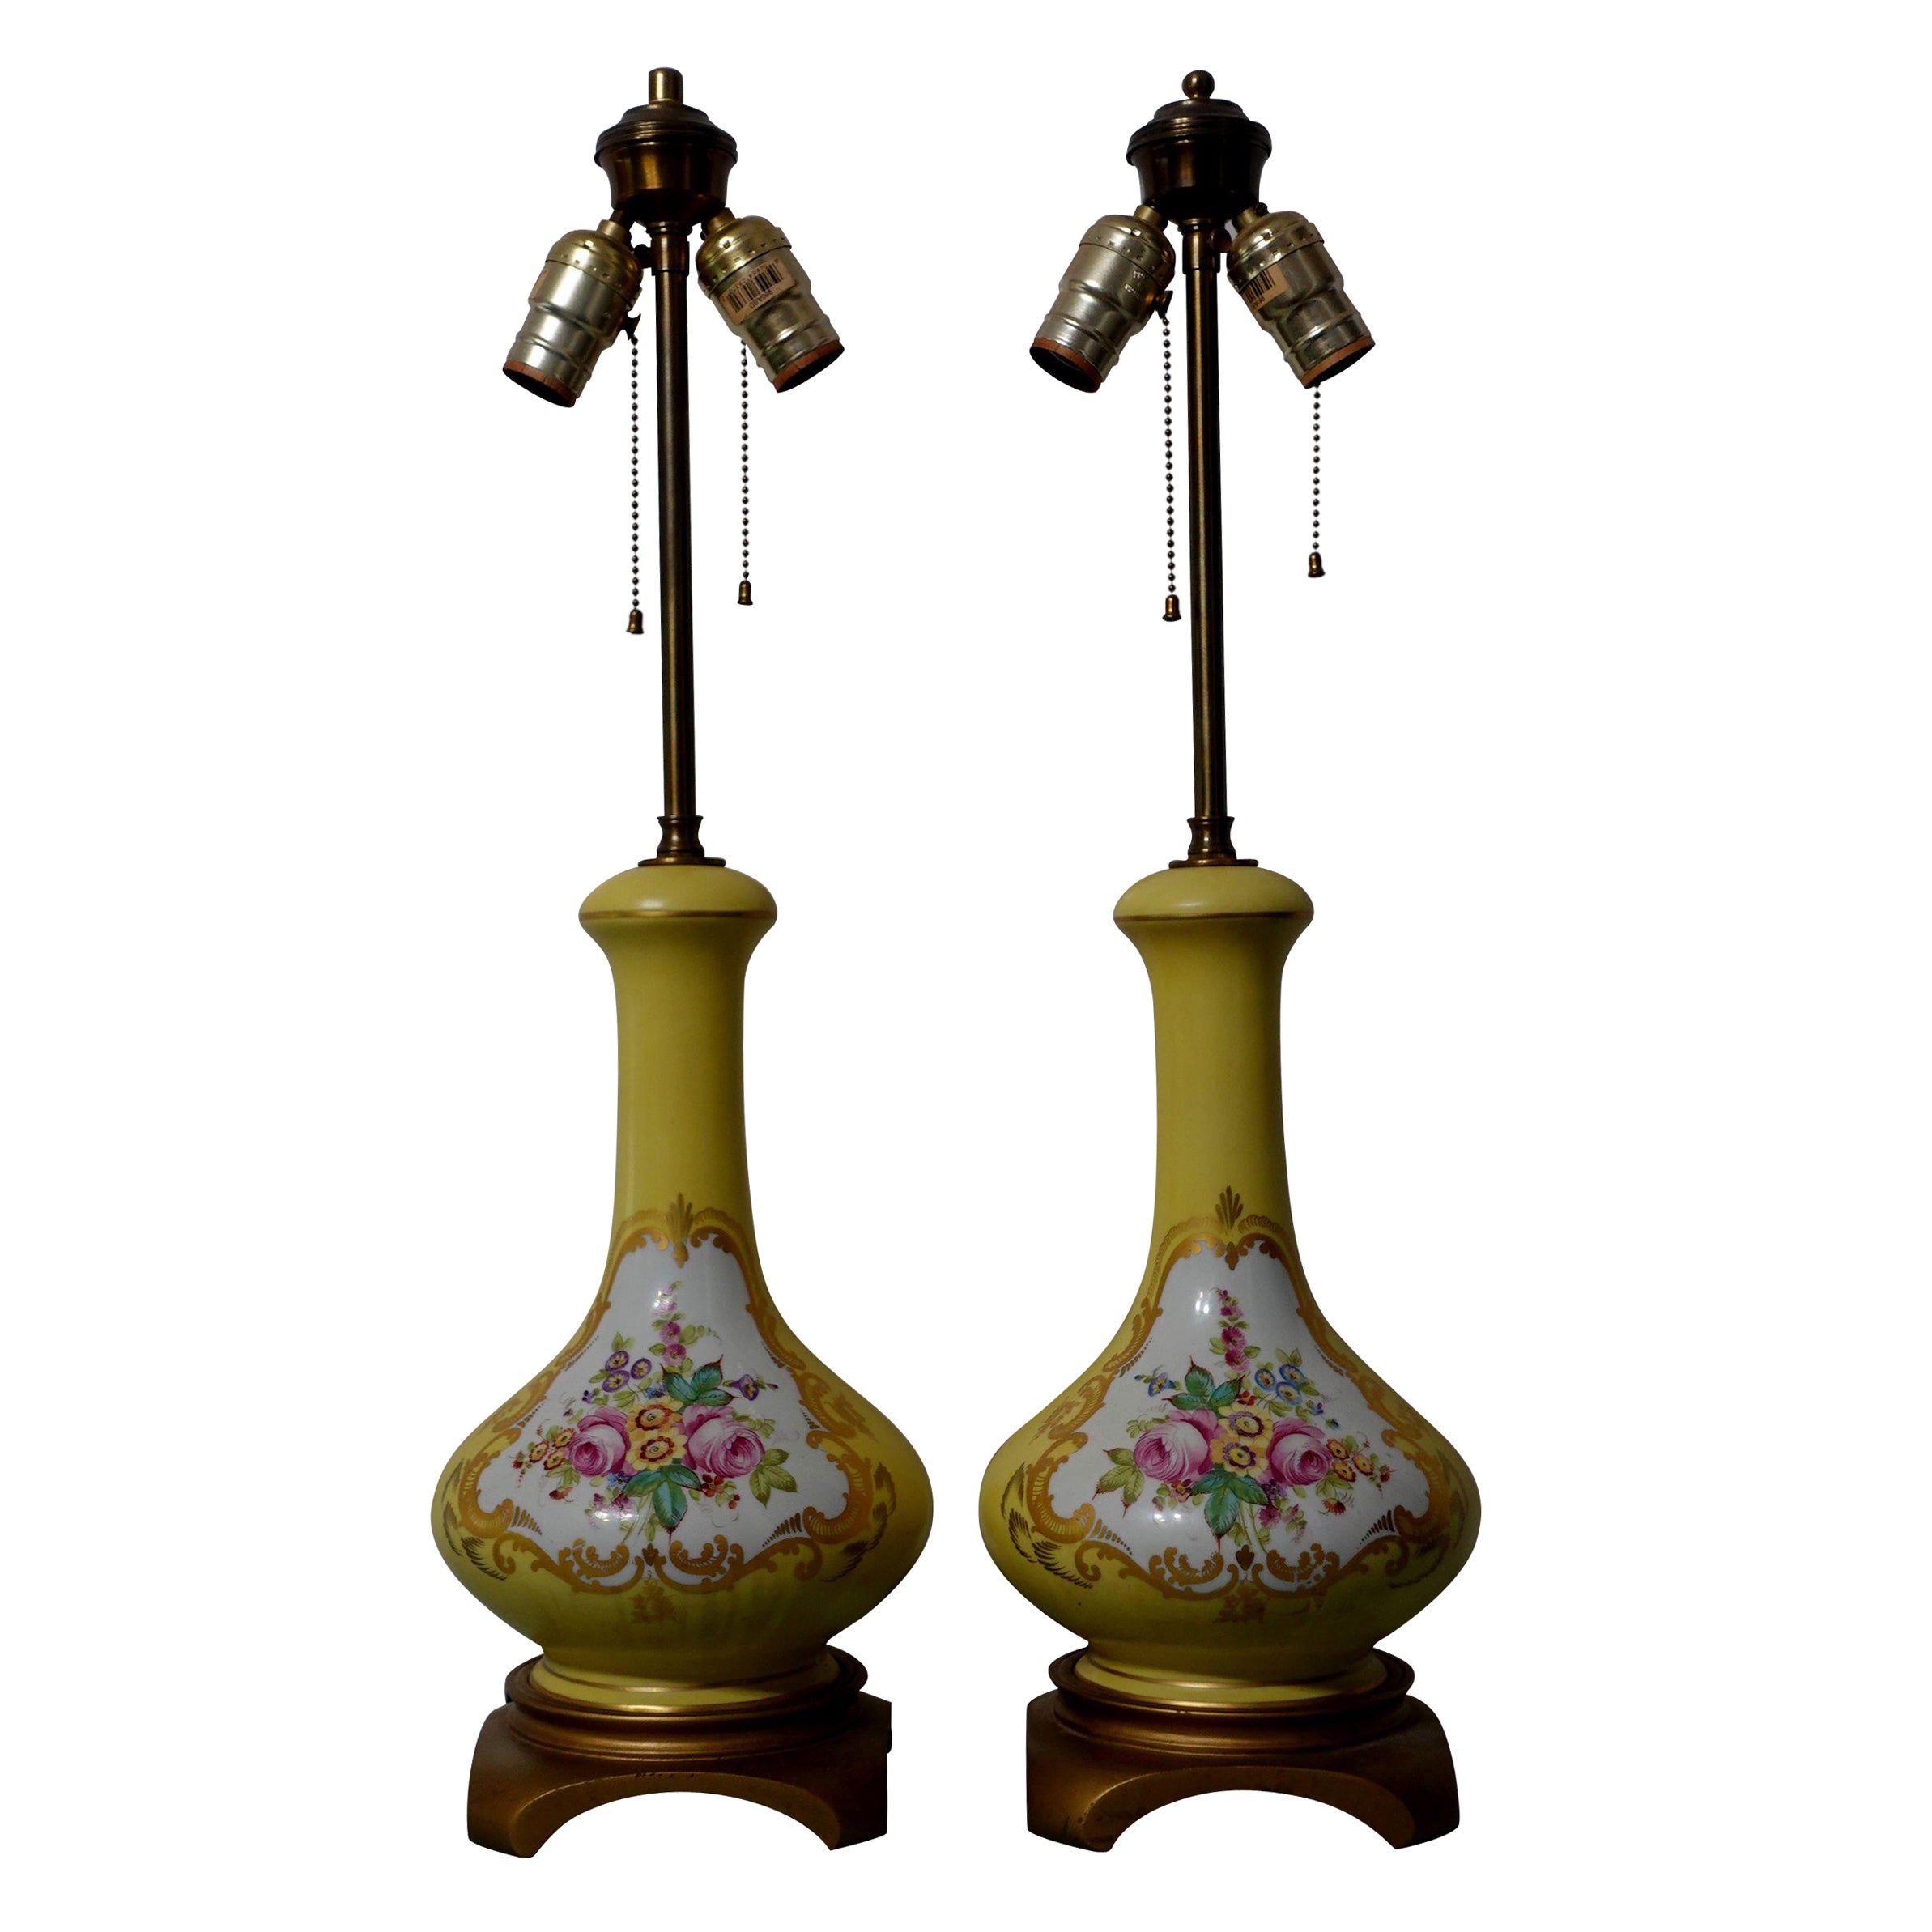 Antique Pair of Shaped Hand-Painted Reserved Floral Lamps, 1900s